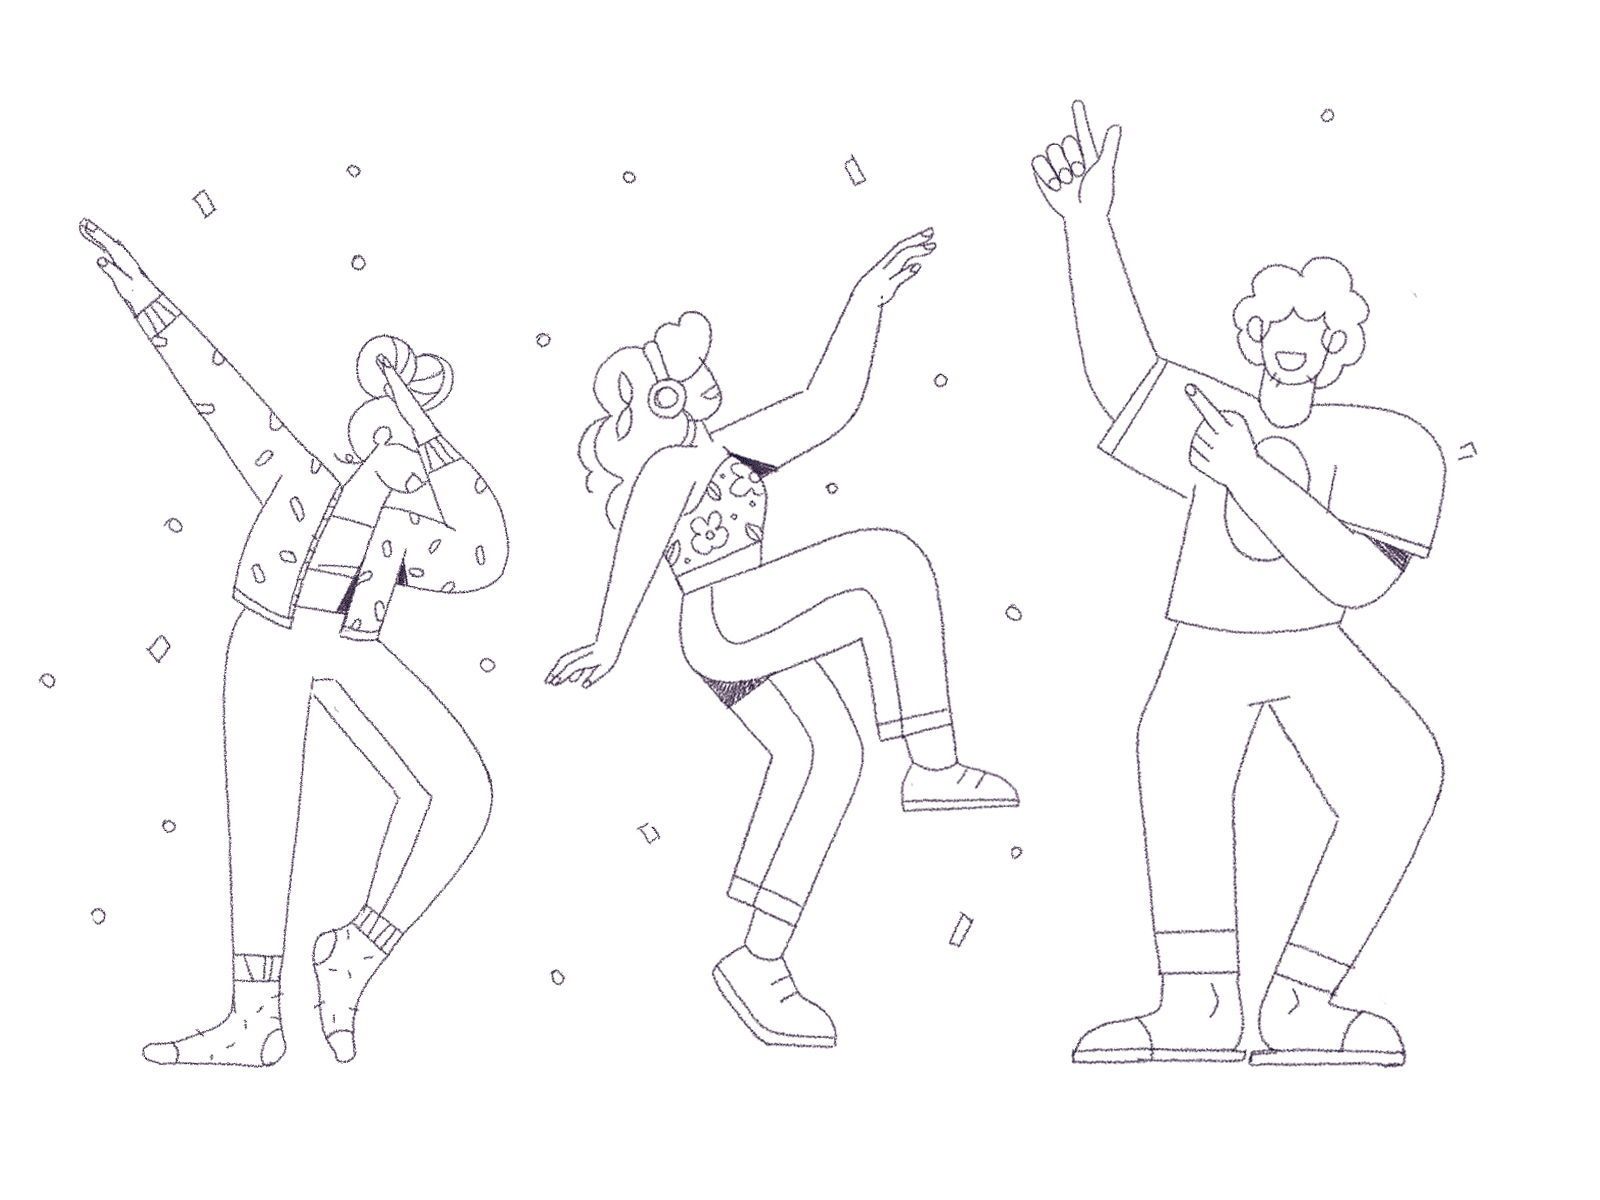 Healing Dancing bailar dance dance dance dancing flat design friends happiness heal healing i like to move it move it illustration move move it move it out moverse nervous system shake shake it